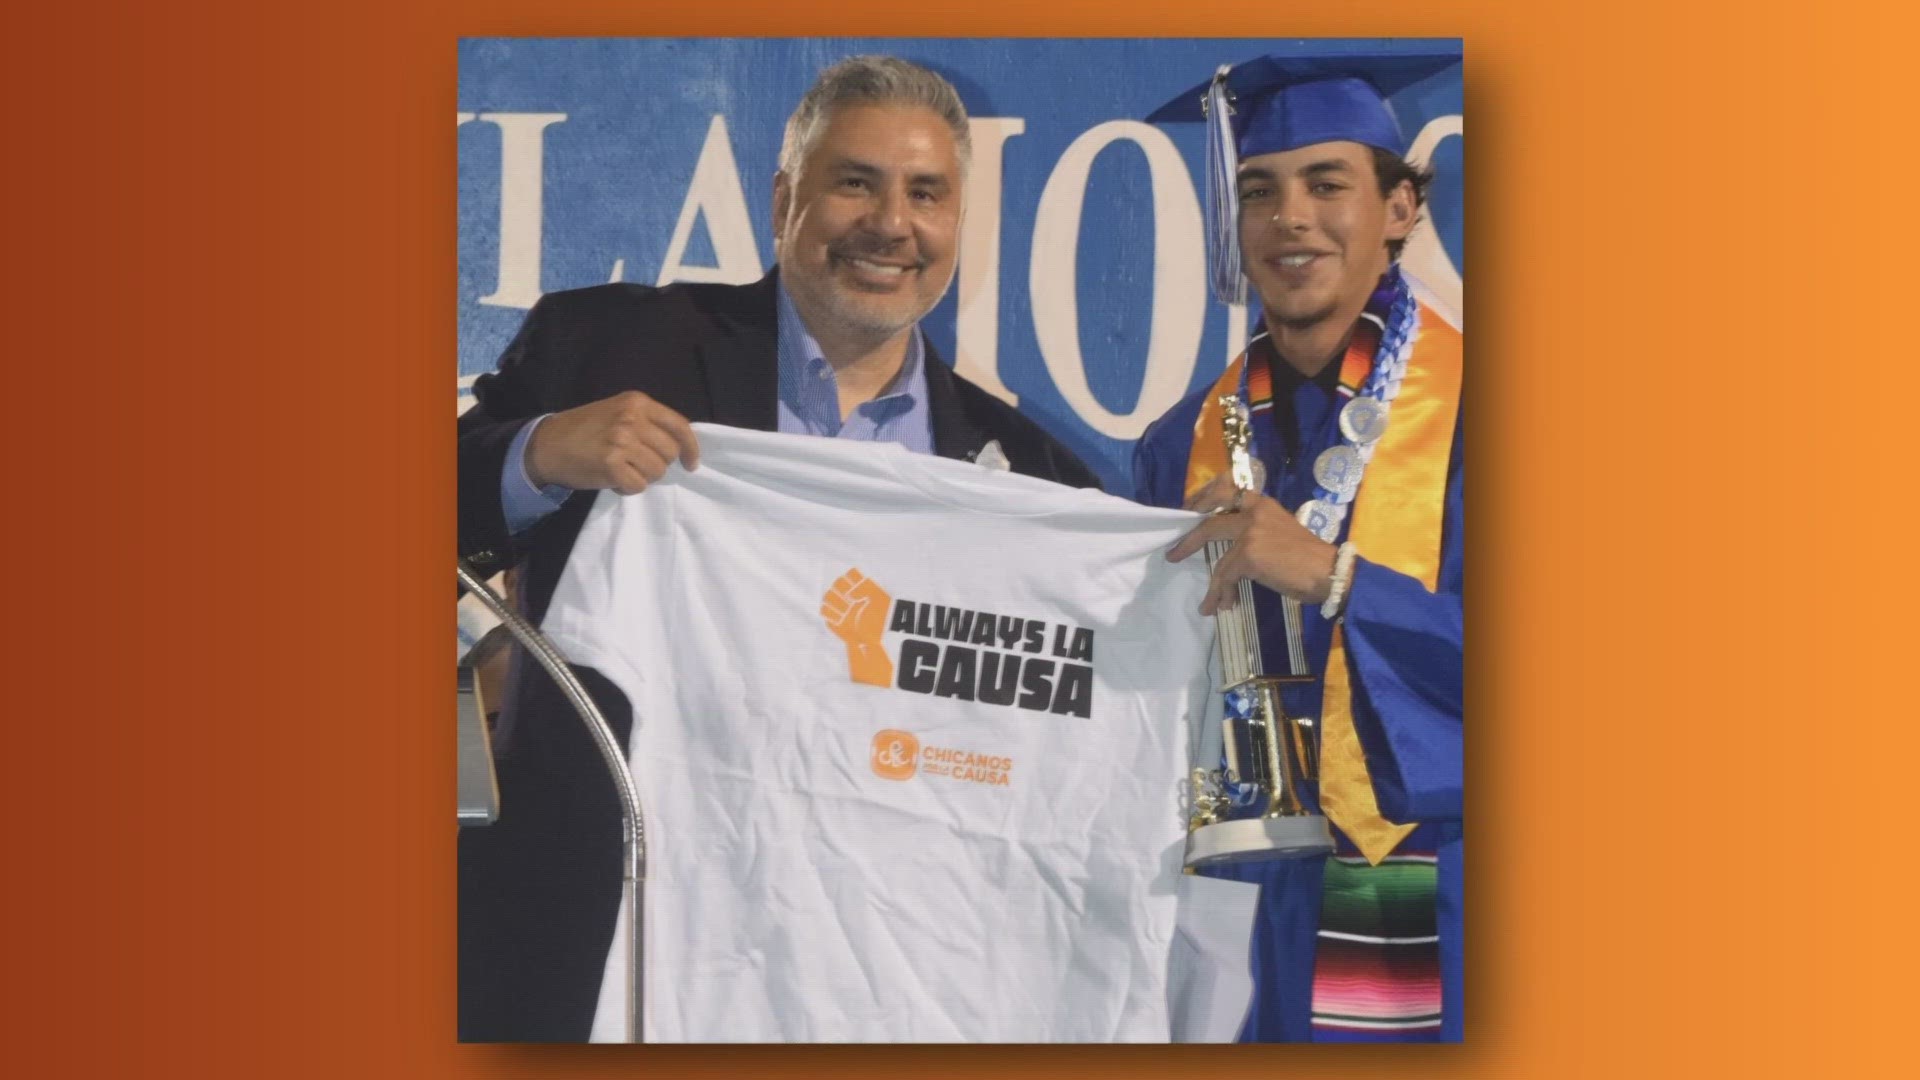 Several students from the "Copper Corridor" area in Arizona earn scholarships from Chicanos por la Causa.